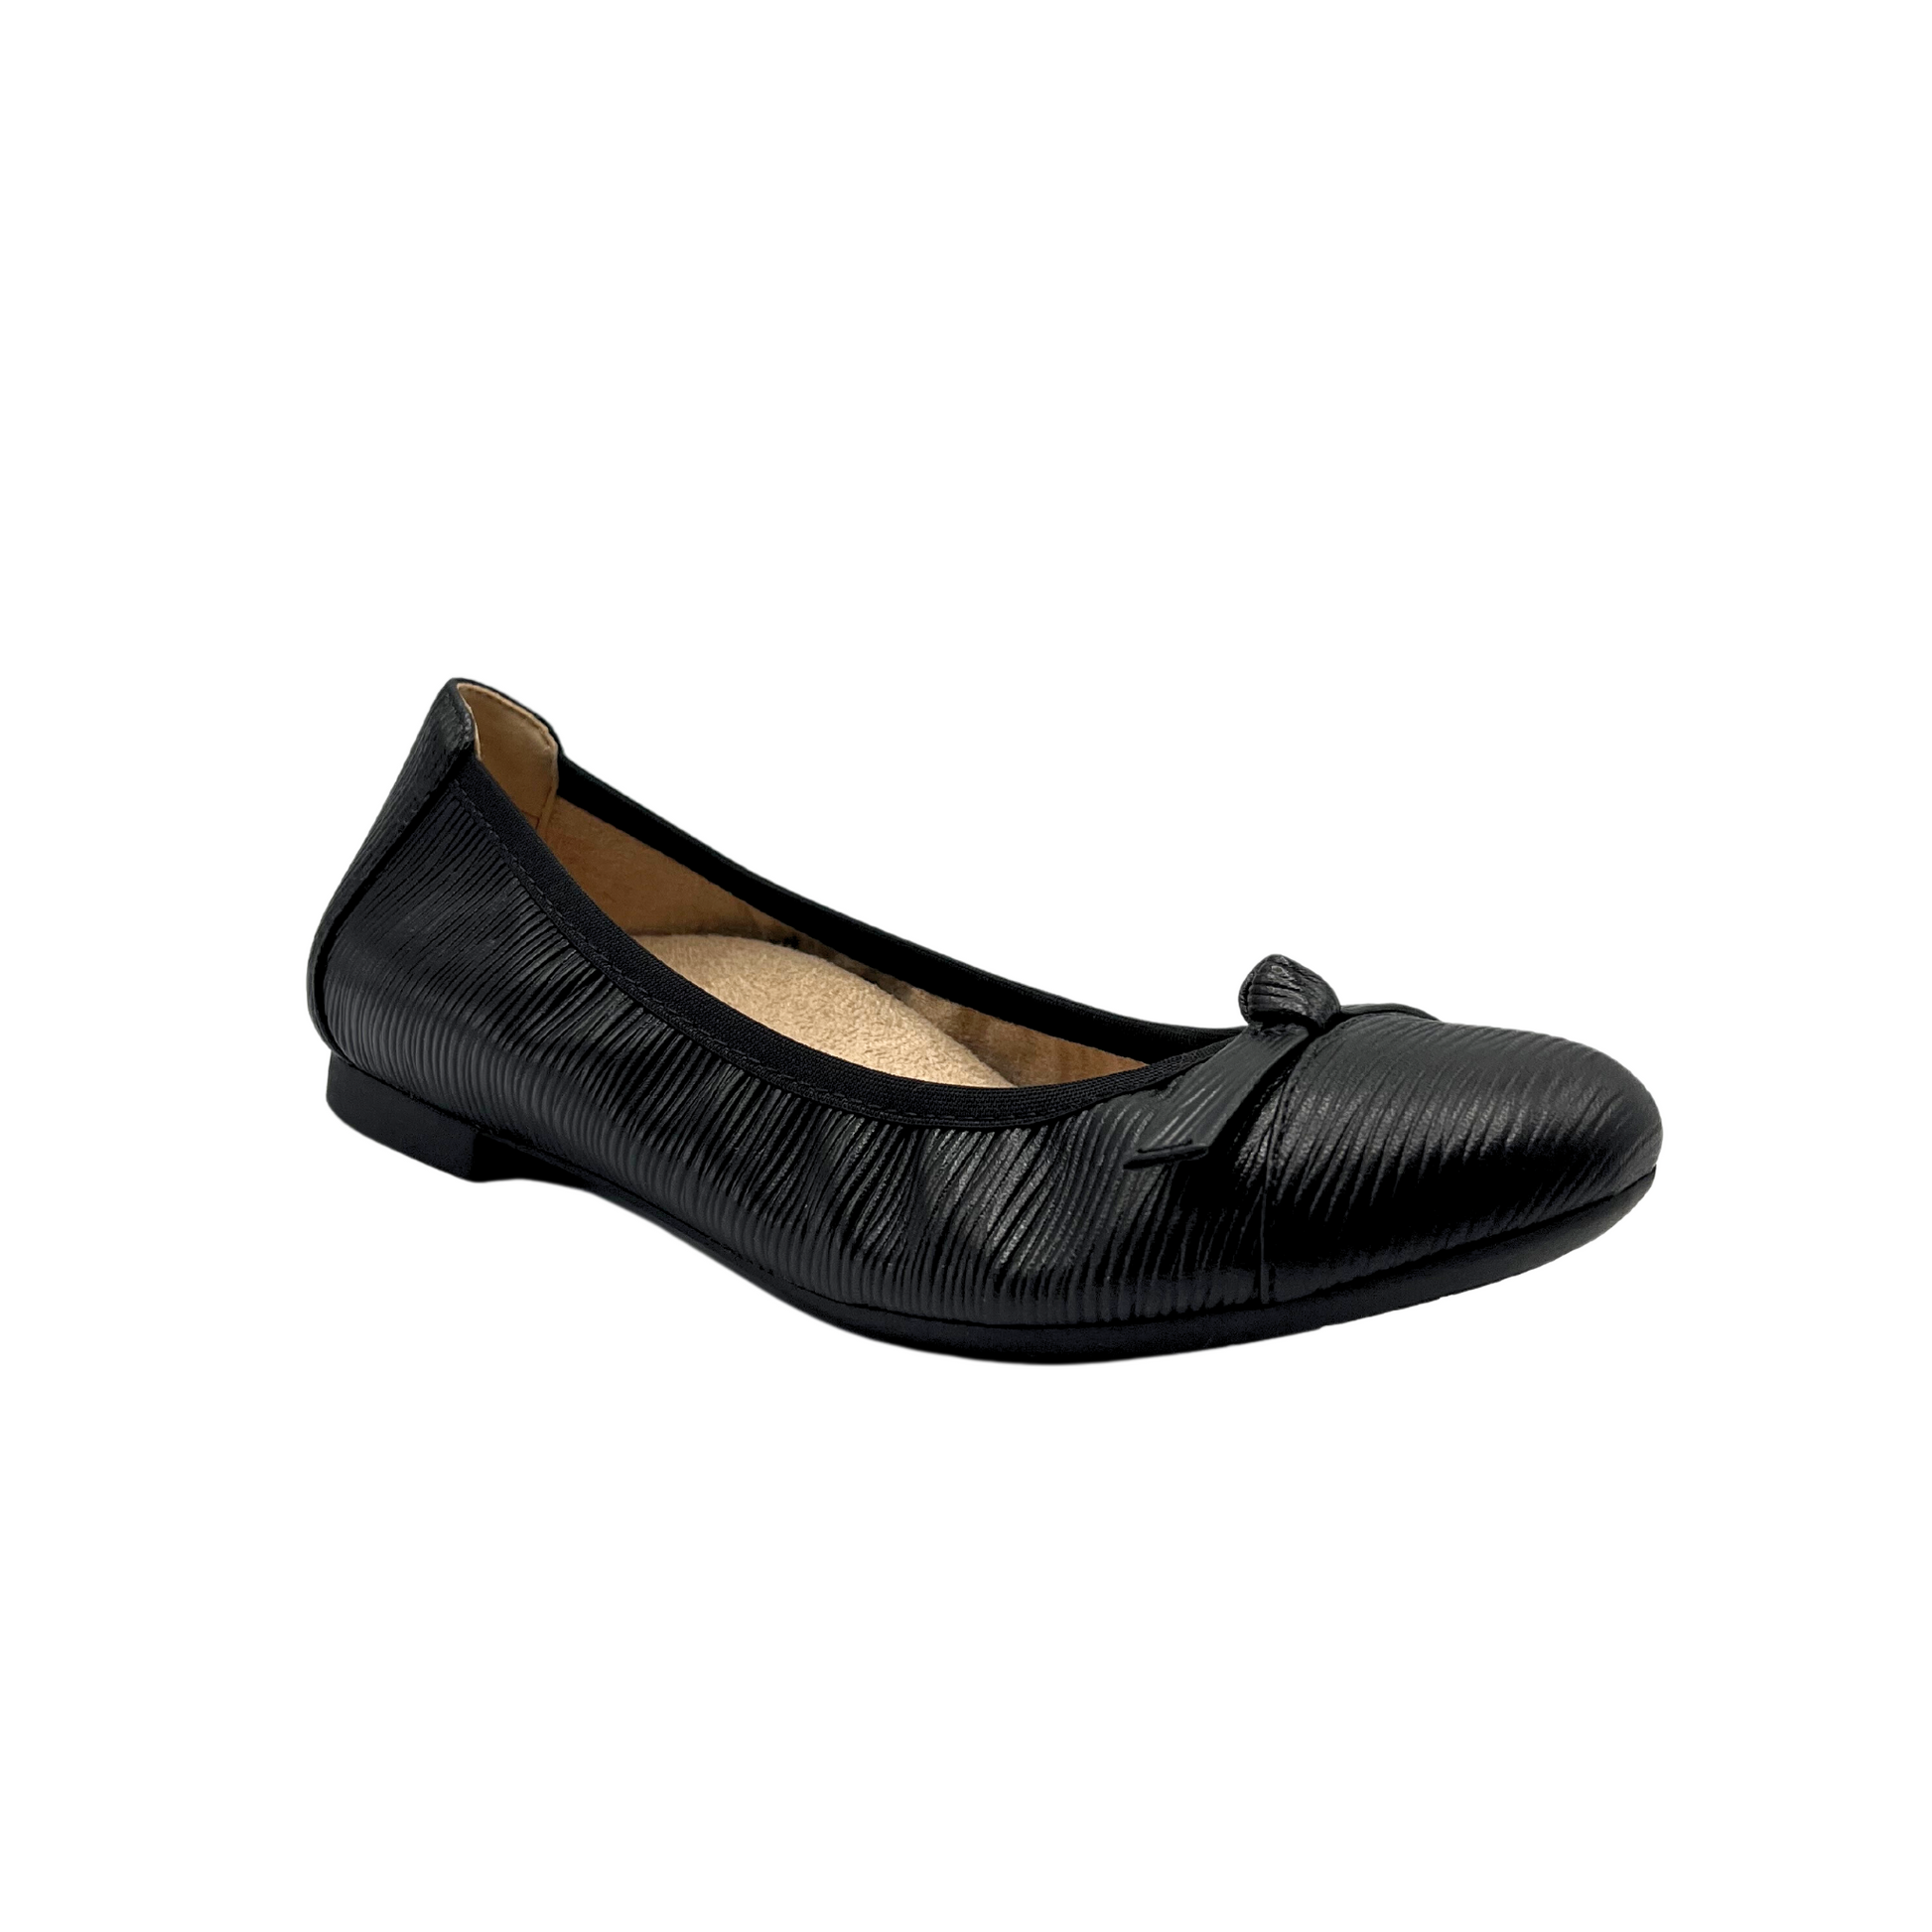 Anlge side view of a black leather ballet flat.  Removable, ergonomic insole with great arch support